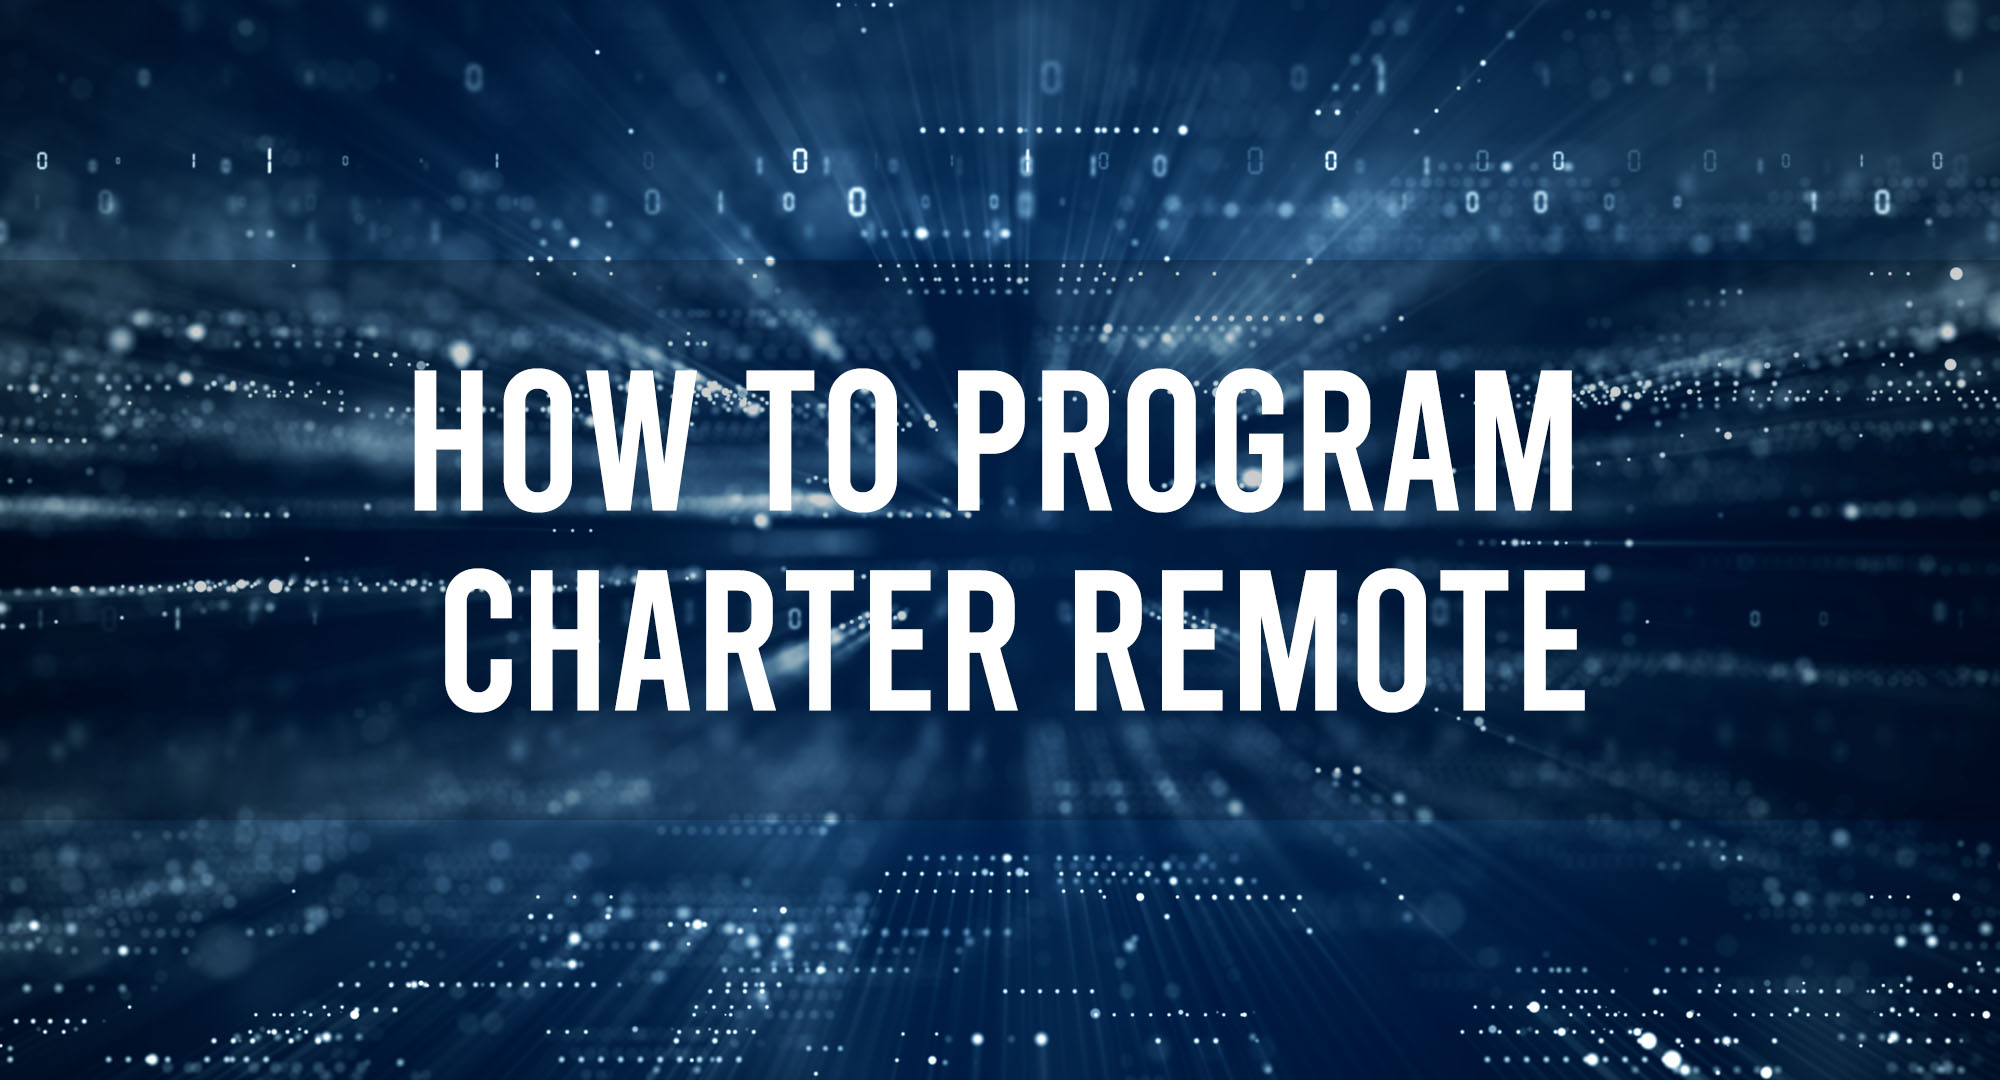 How To Program Charter Remote